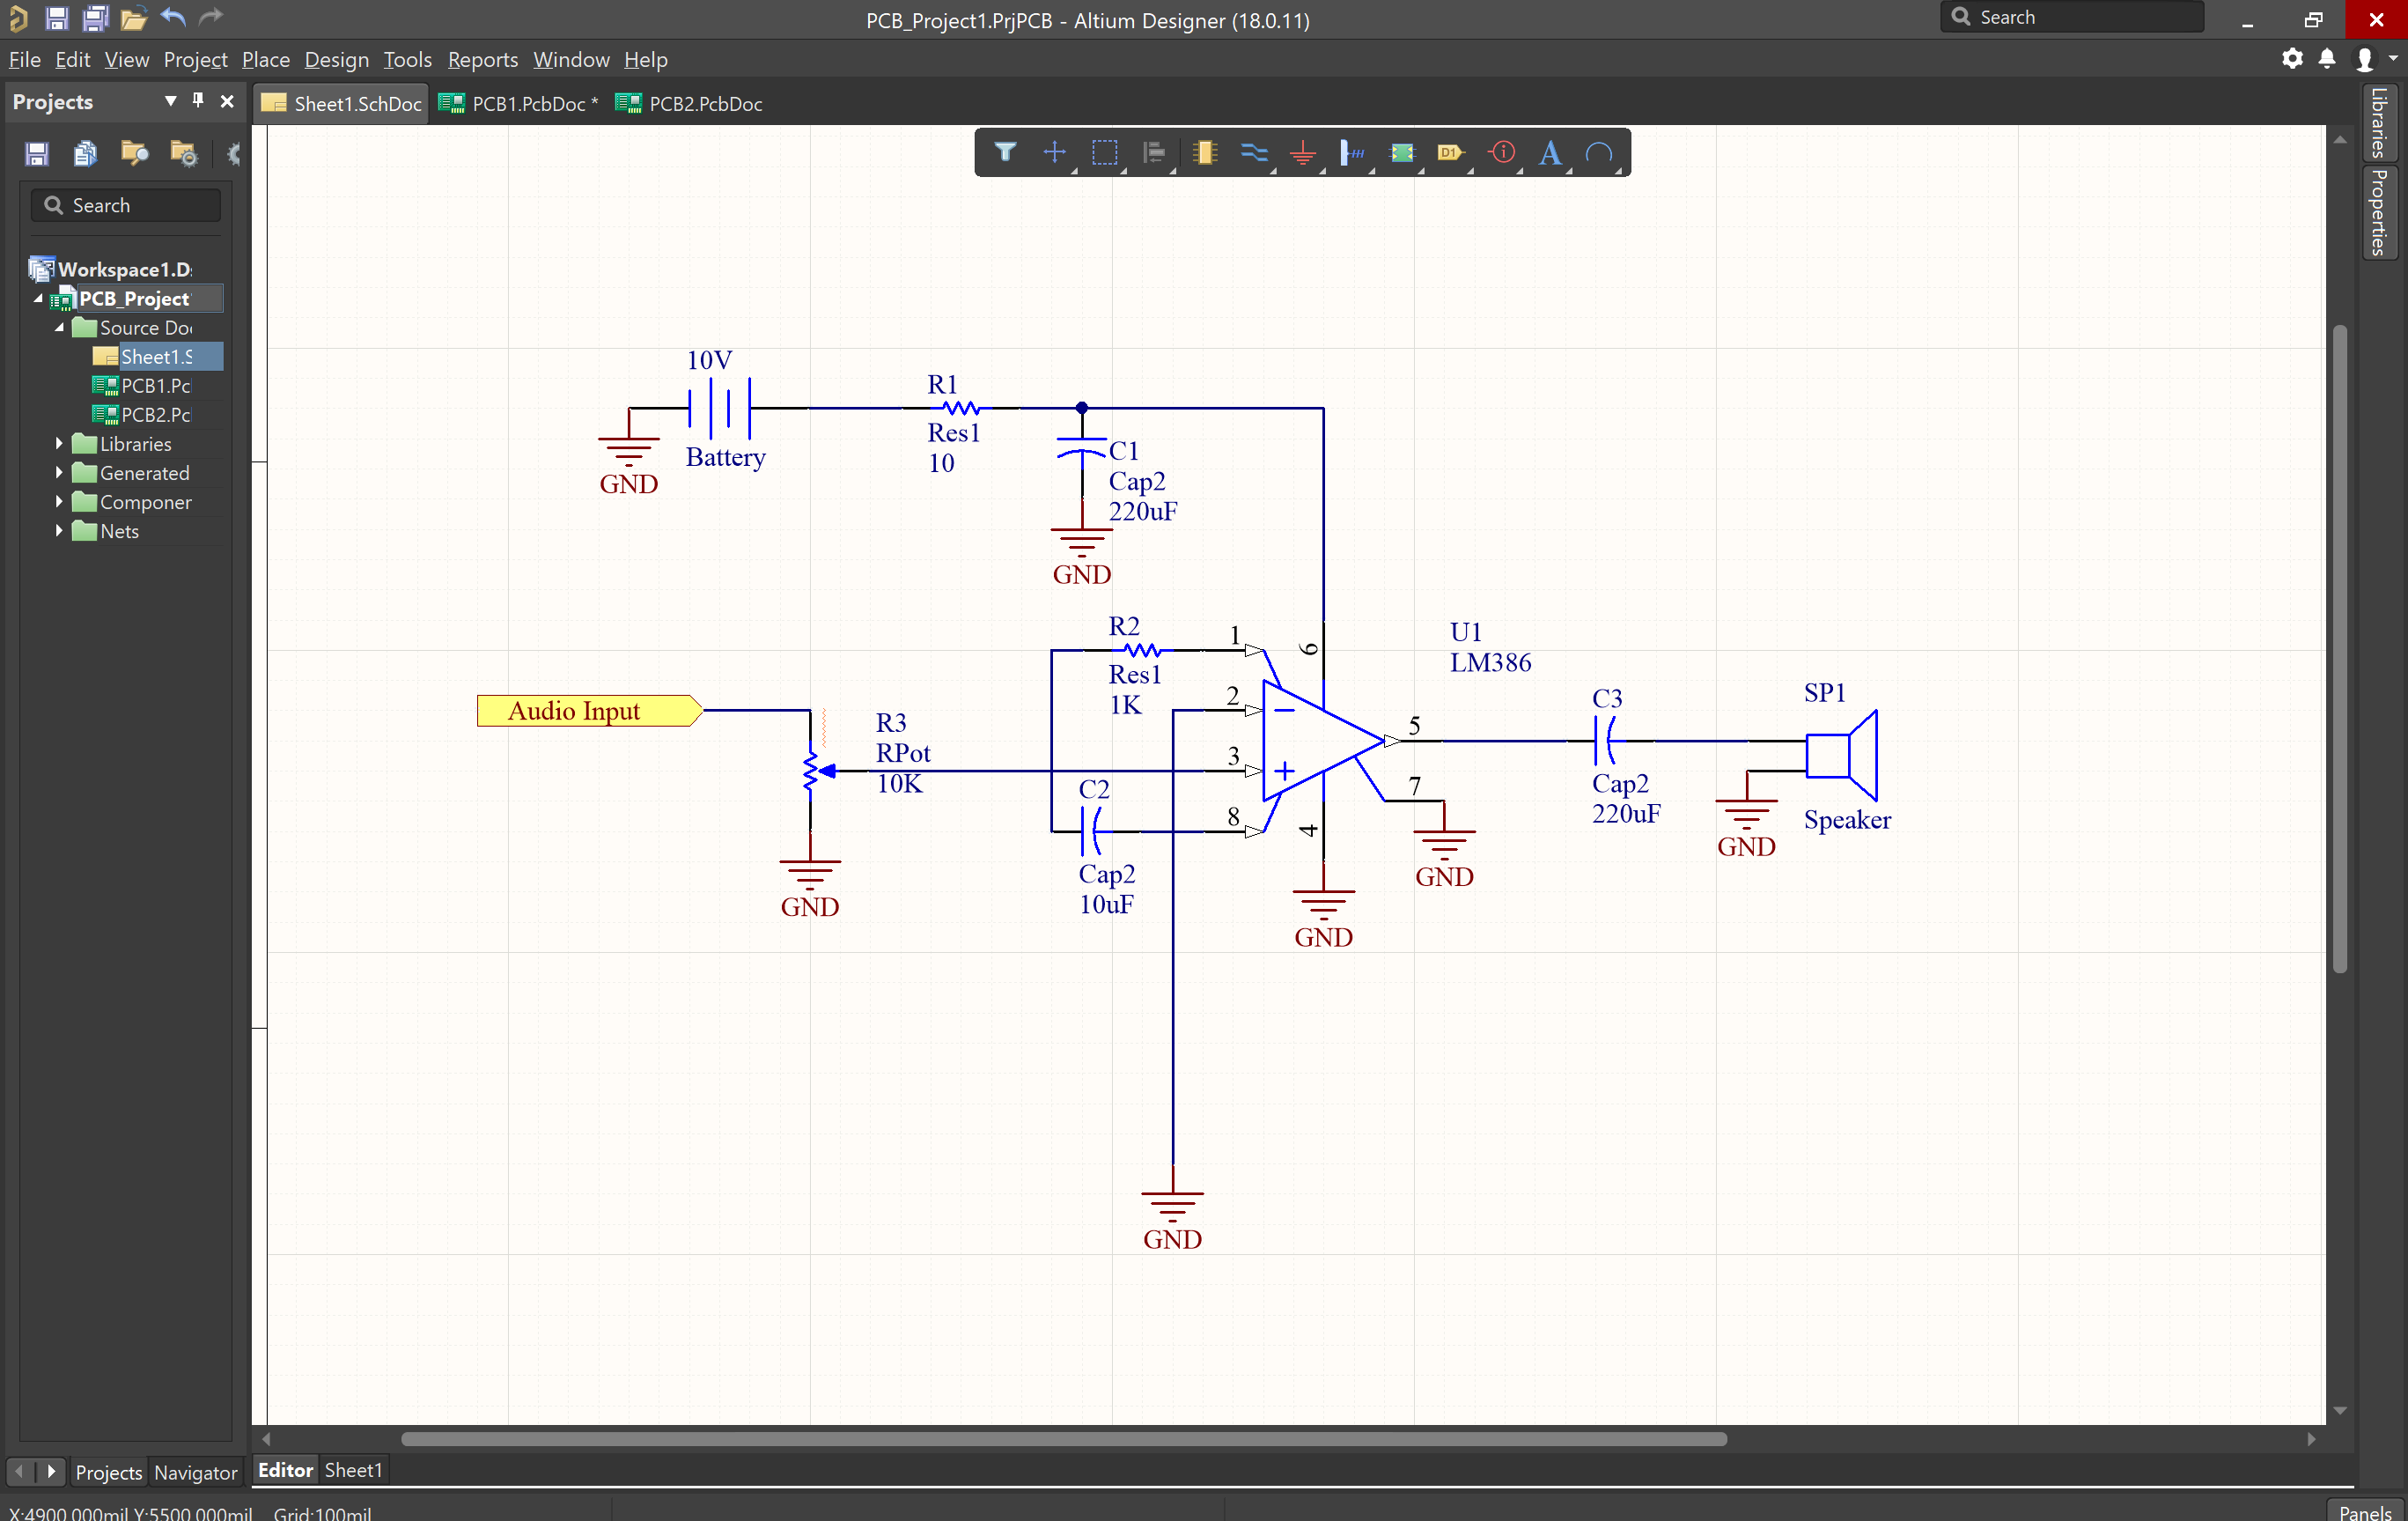 Schematic with components placed, routing, grounding, and a port